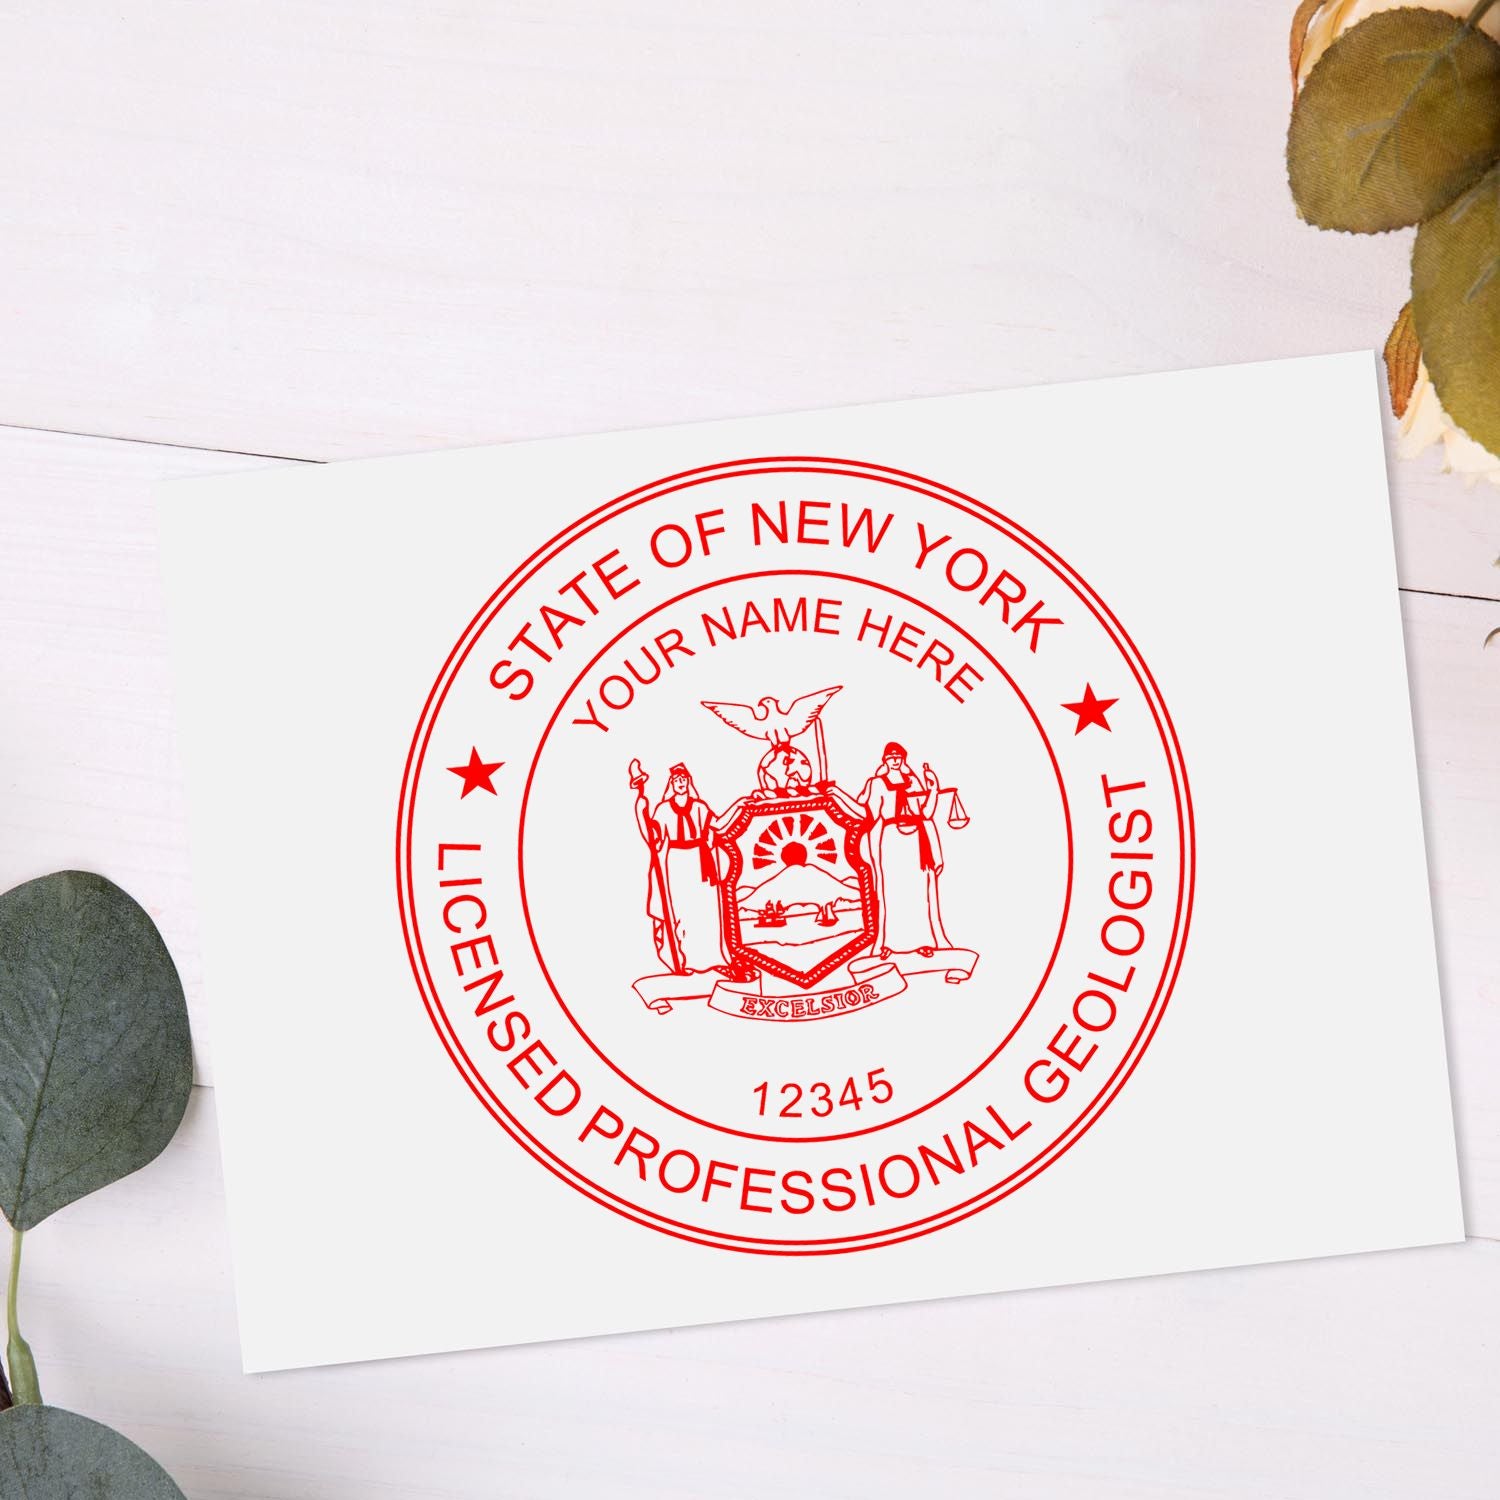 A lifestyle photo showing a stamped image of the New York Professional Geologist Seal Stamp on a piece of paper